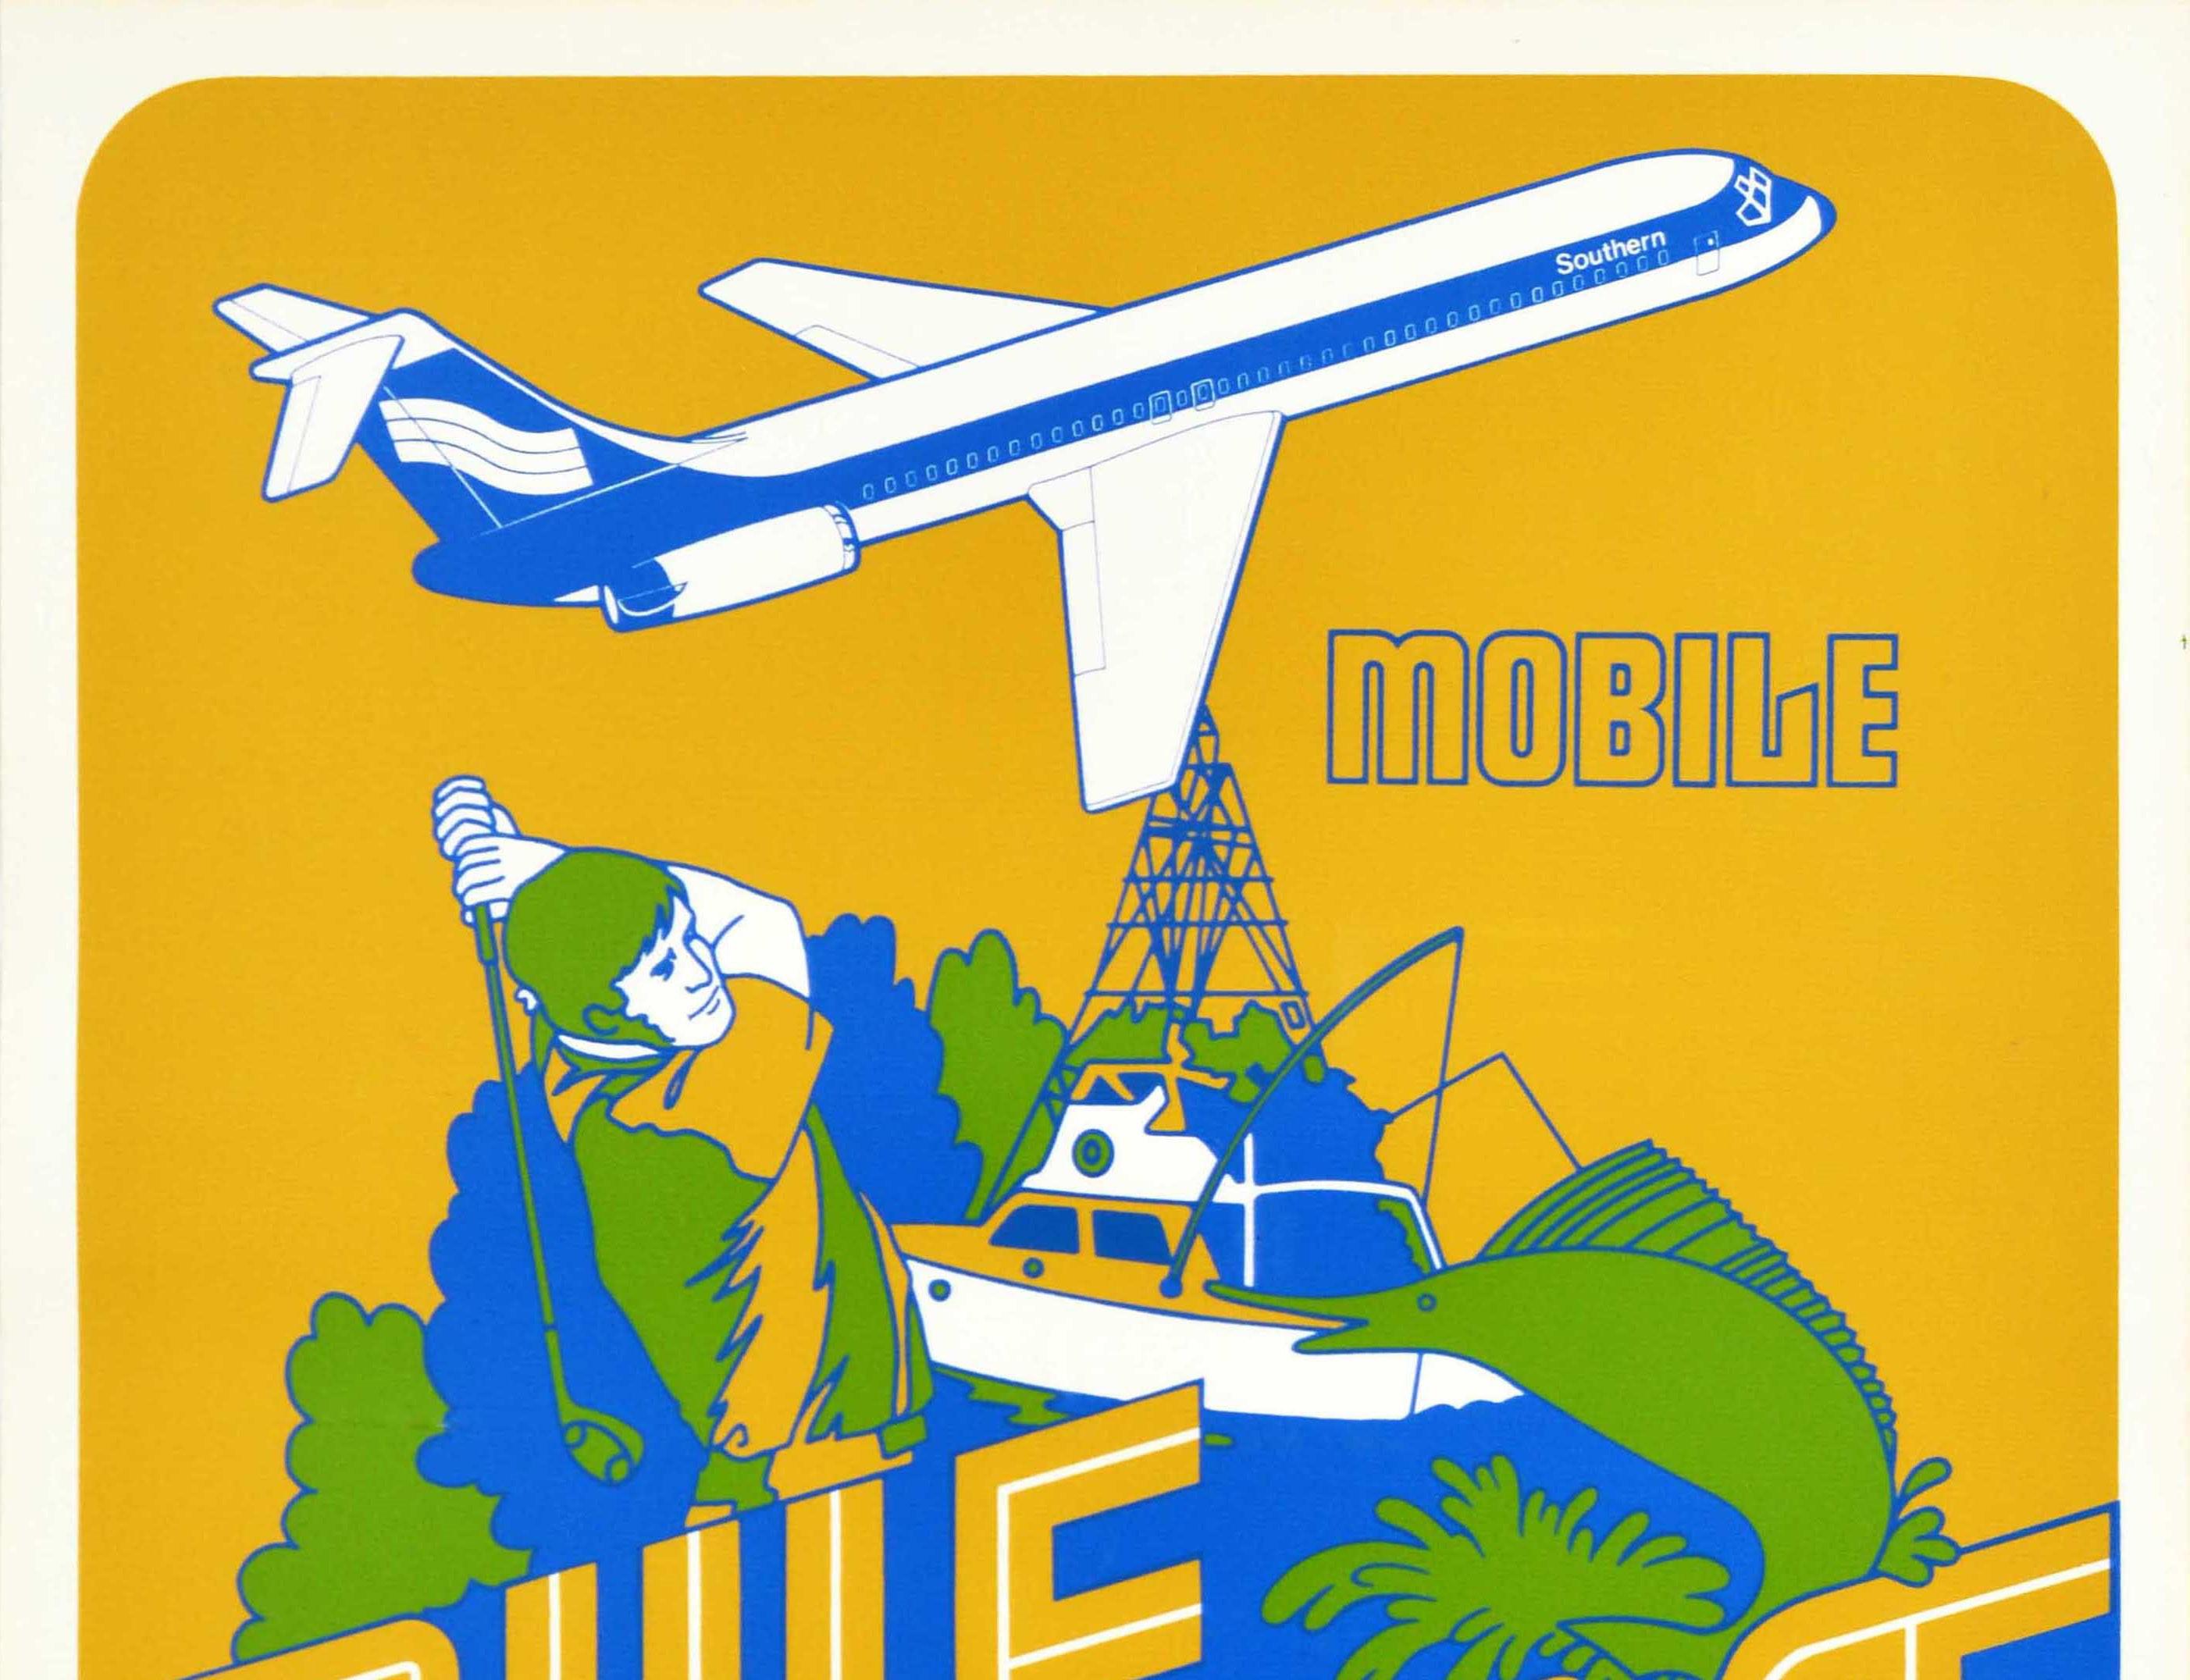 Original vintage travel poster for Mobile Gulf Coast Southern Airways (1944-1979) featuring a colourful diagonal design depicting a man playing golf in front of trees with a fish and boat on the side, a Southern plane flying overhead and the title